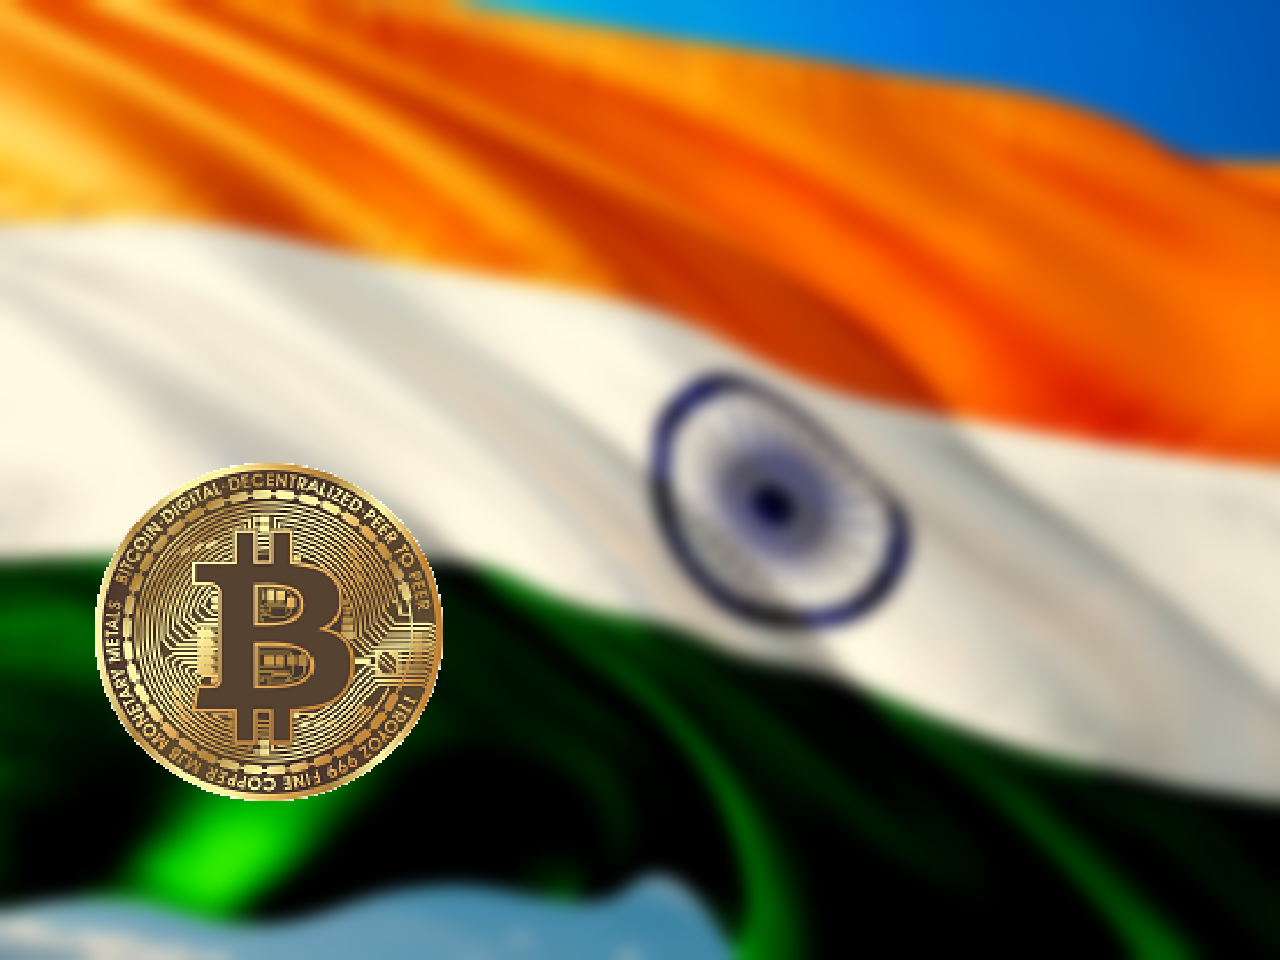 Tight regulations persuades Indians to buy Bitcoin Overseas